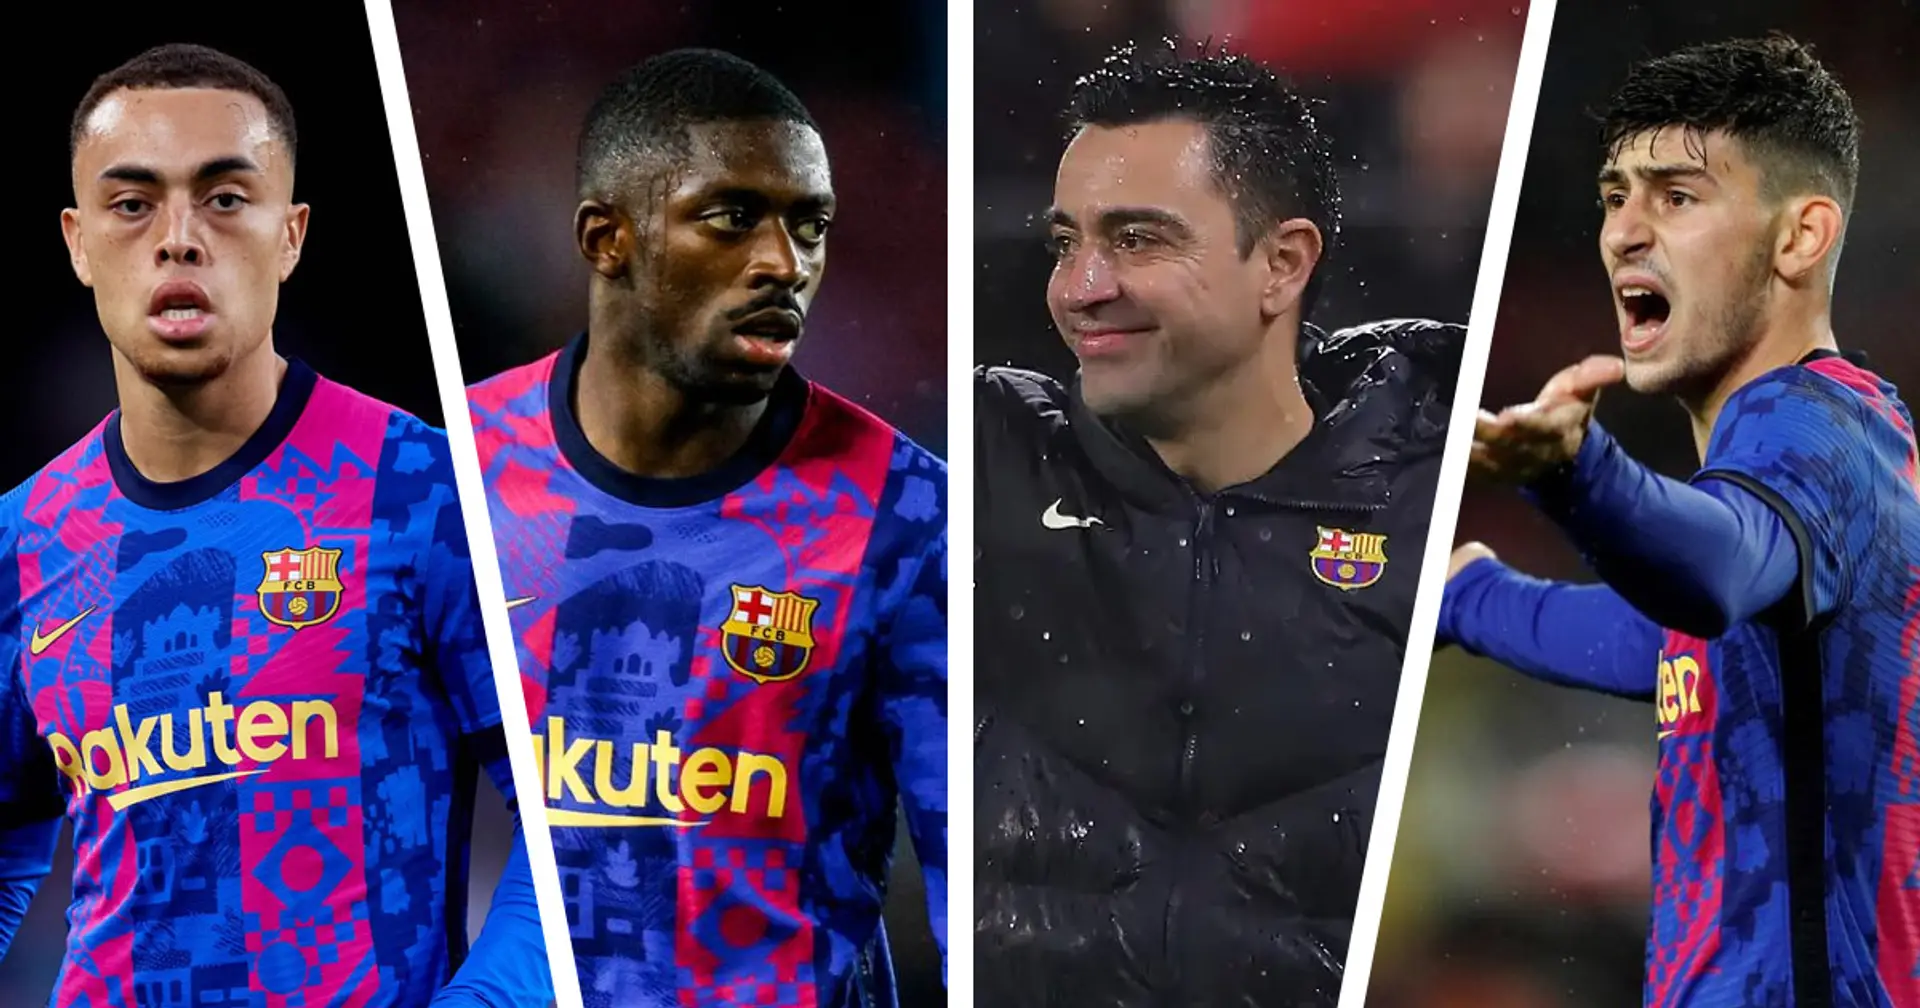 Barca set deadline for Dembele contract extension and 5 more big stories you might've missed